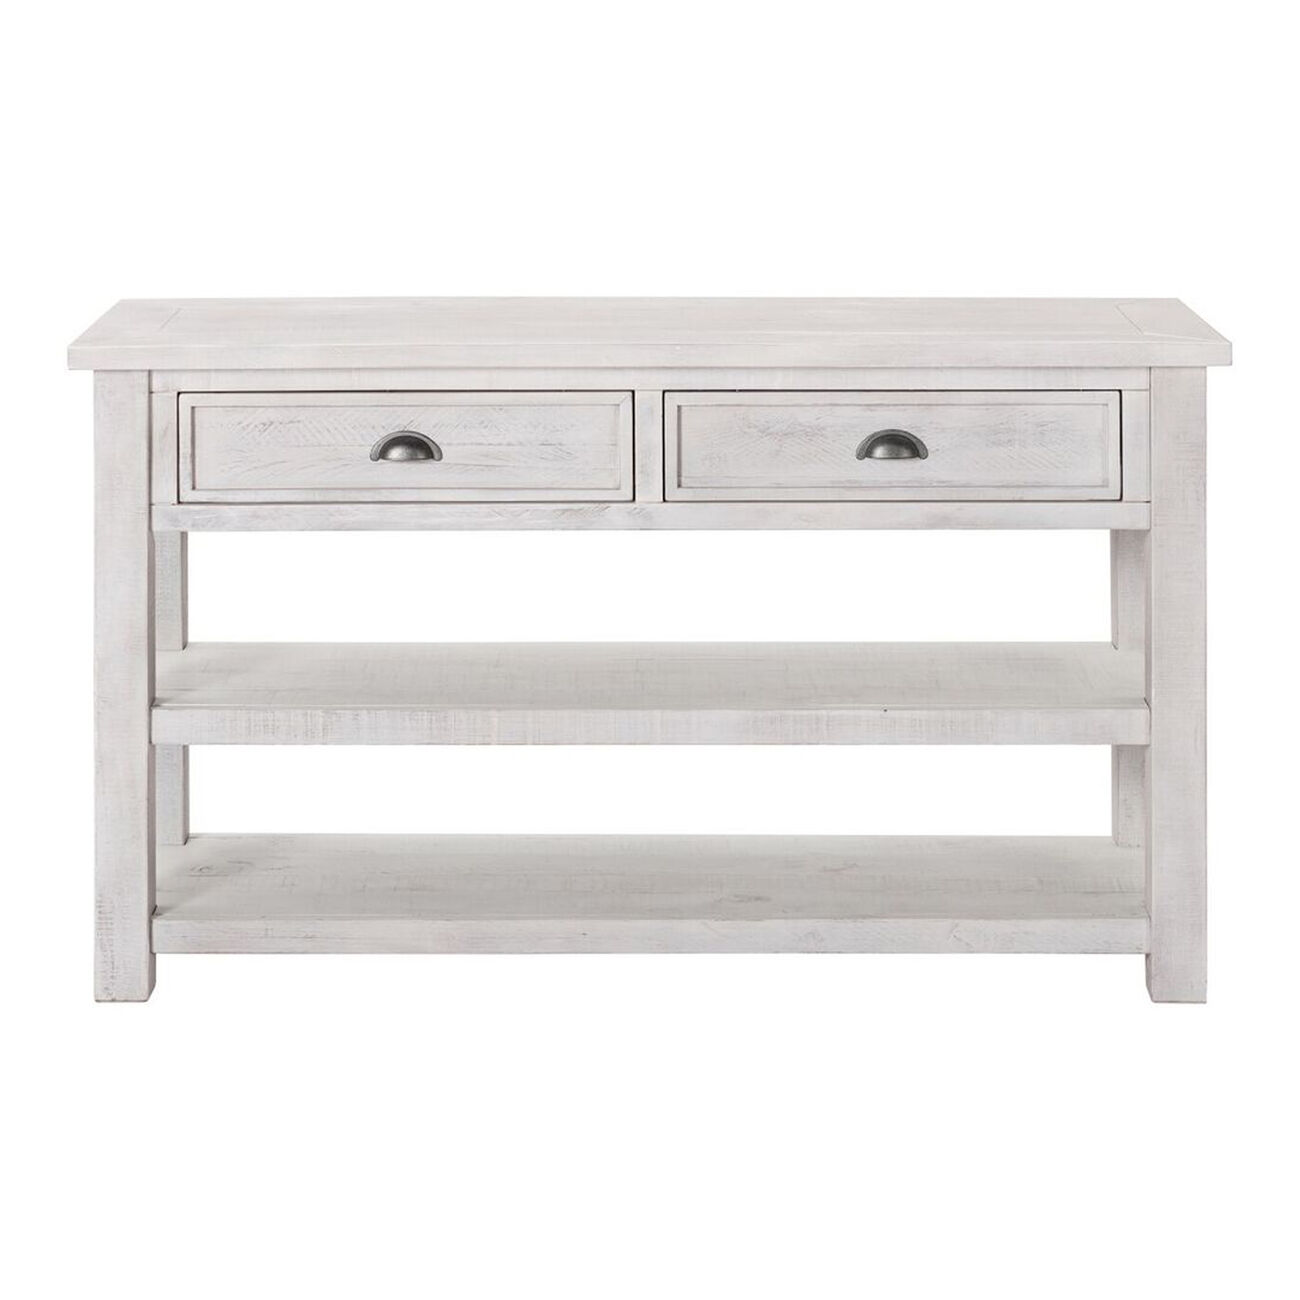 Coastal Style Rectangular Wooden Console Table with 2 Drawers, White